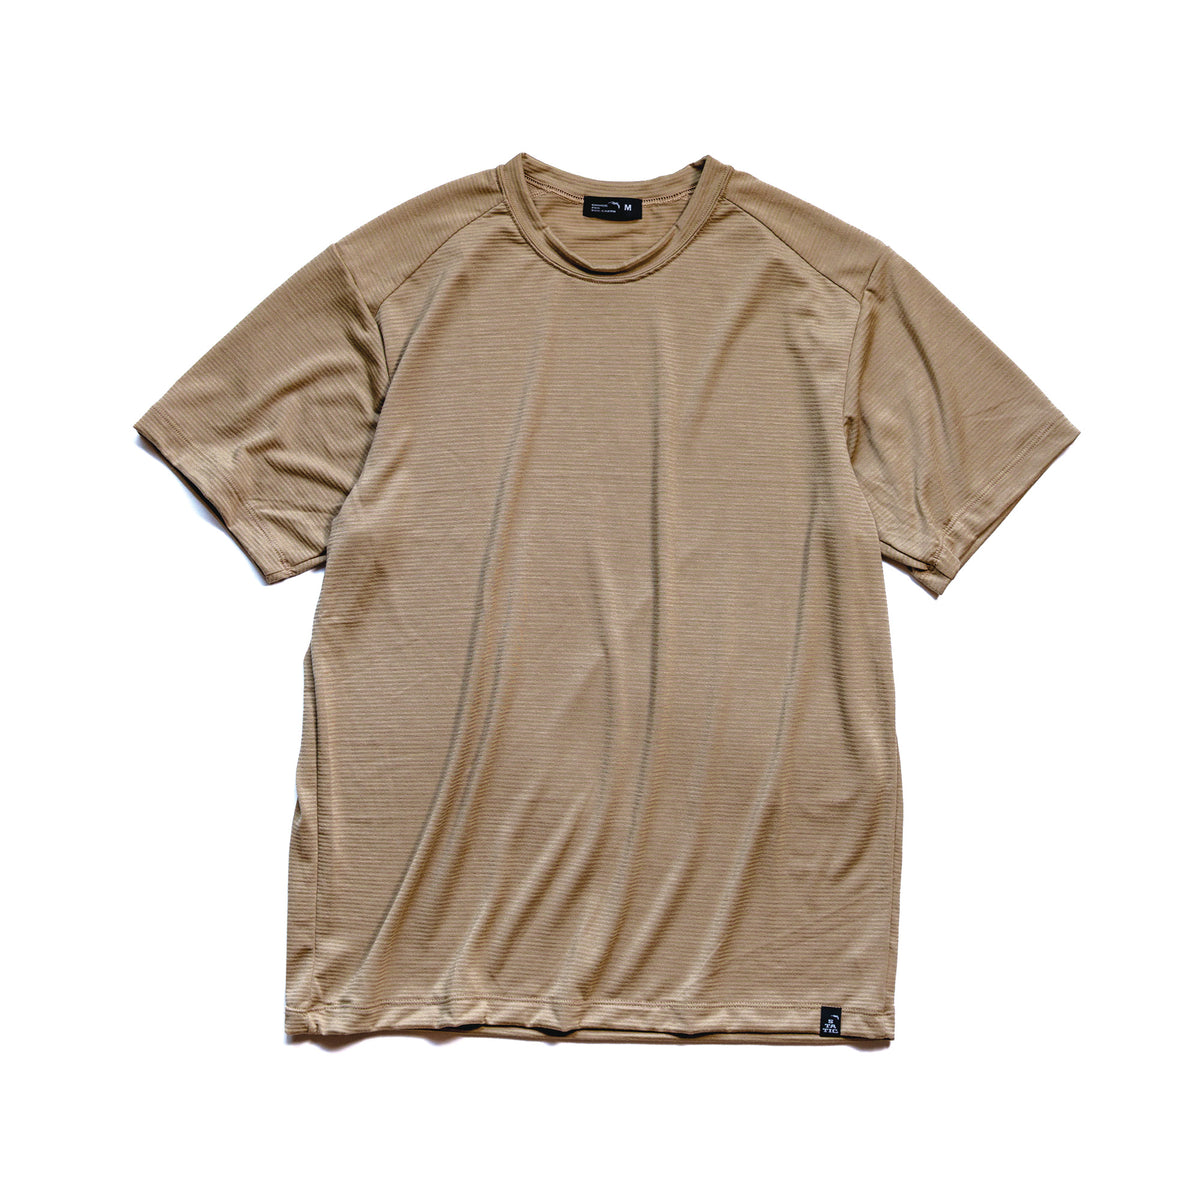 ALL ELEVATION S/S SHIRTS M's